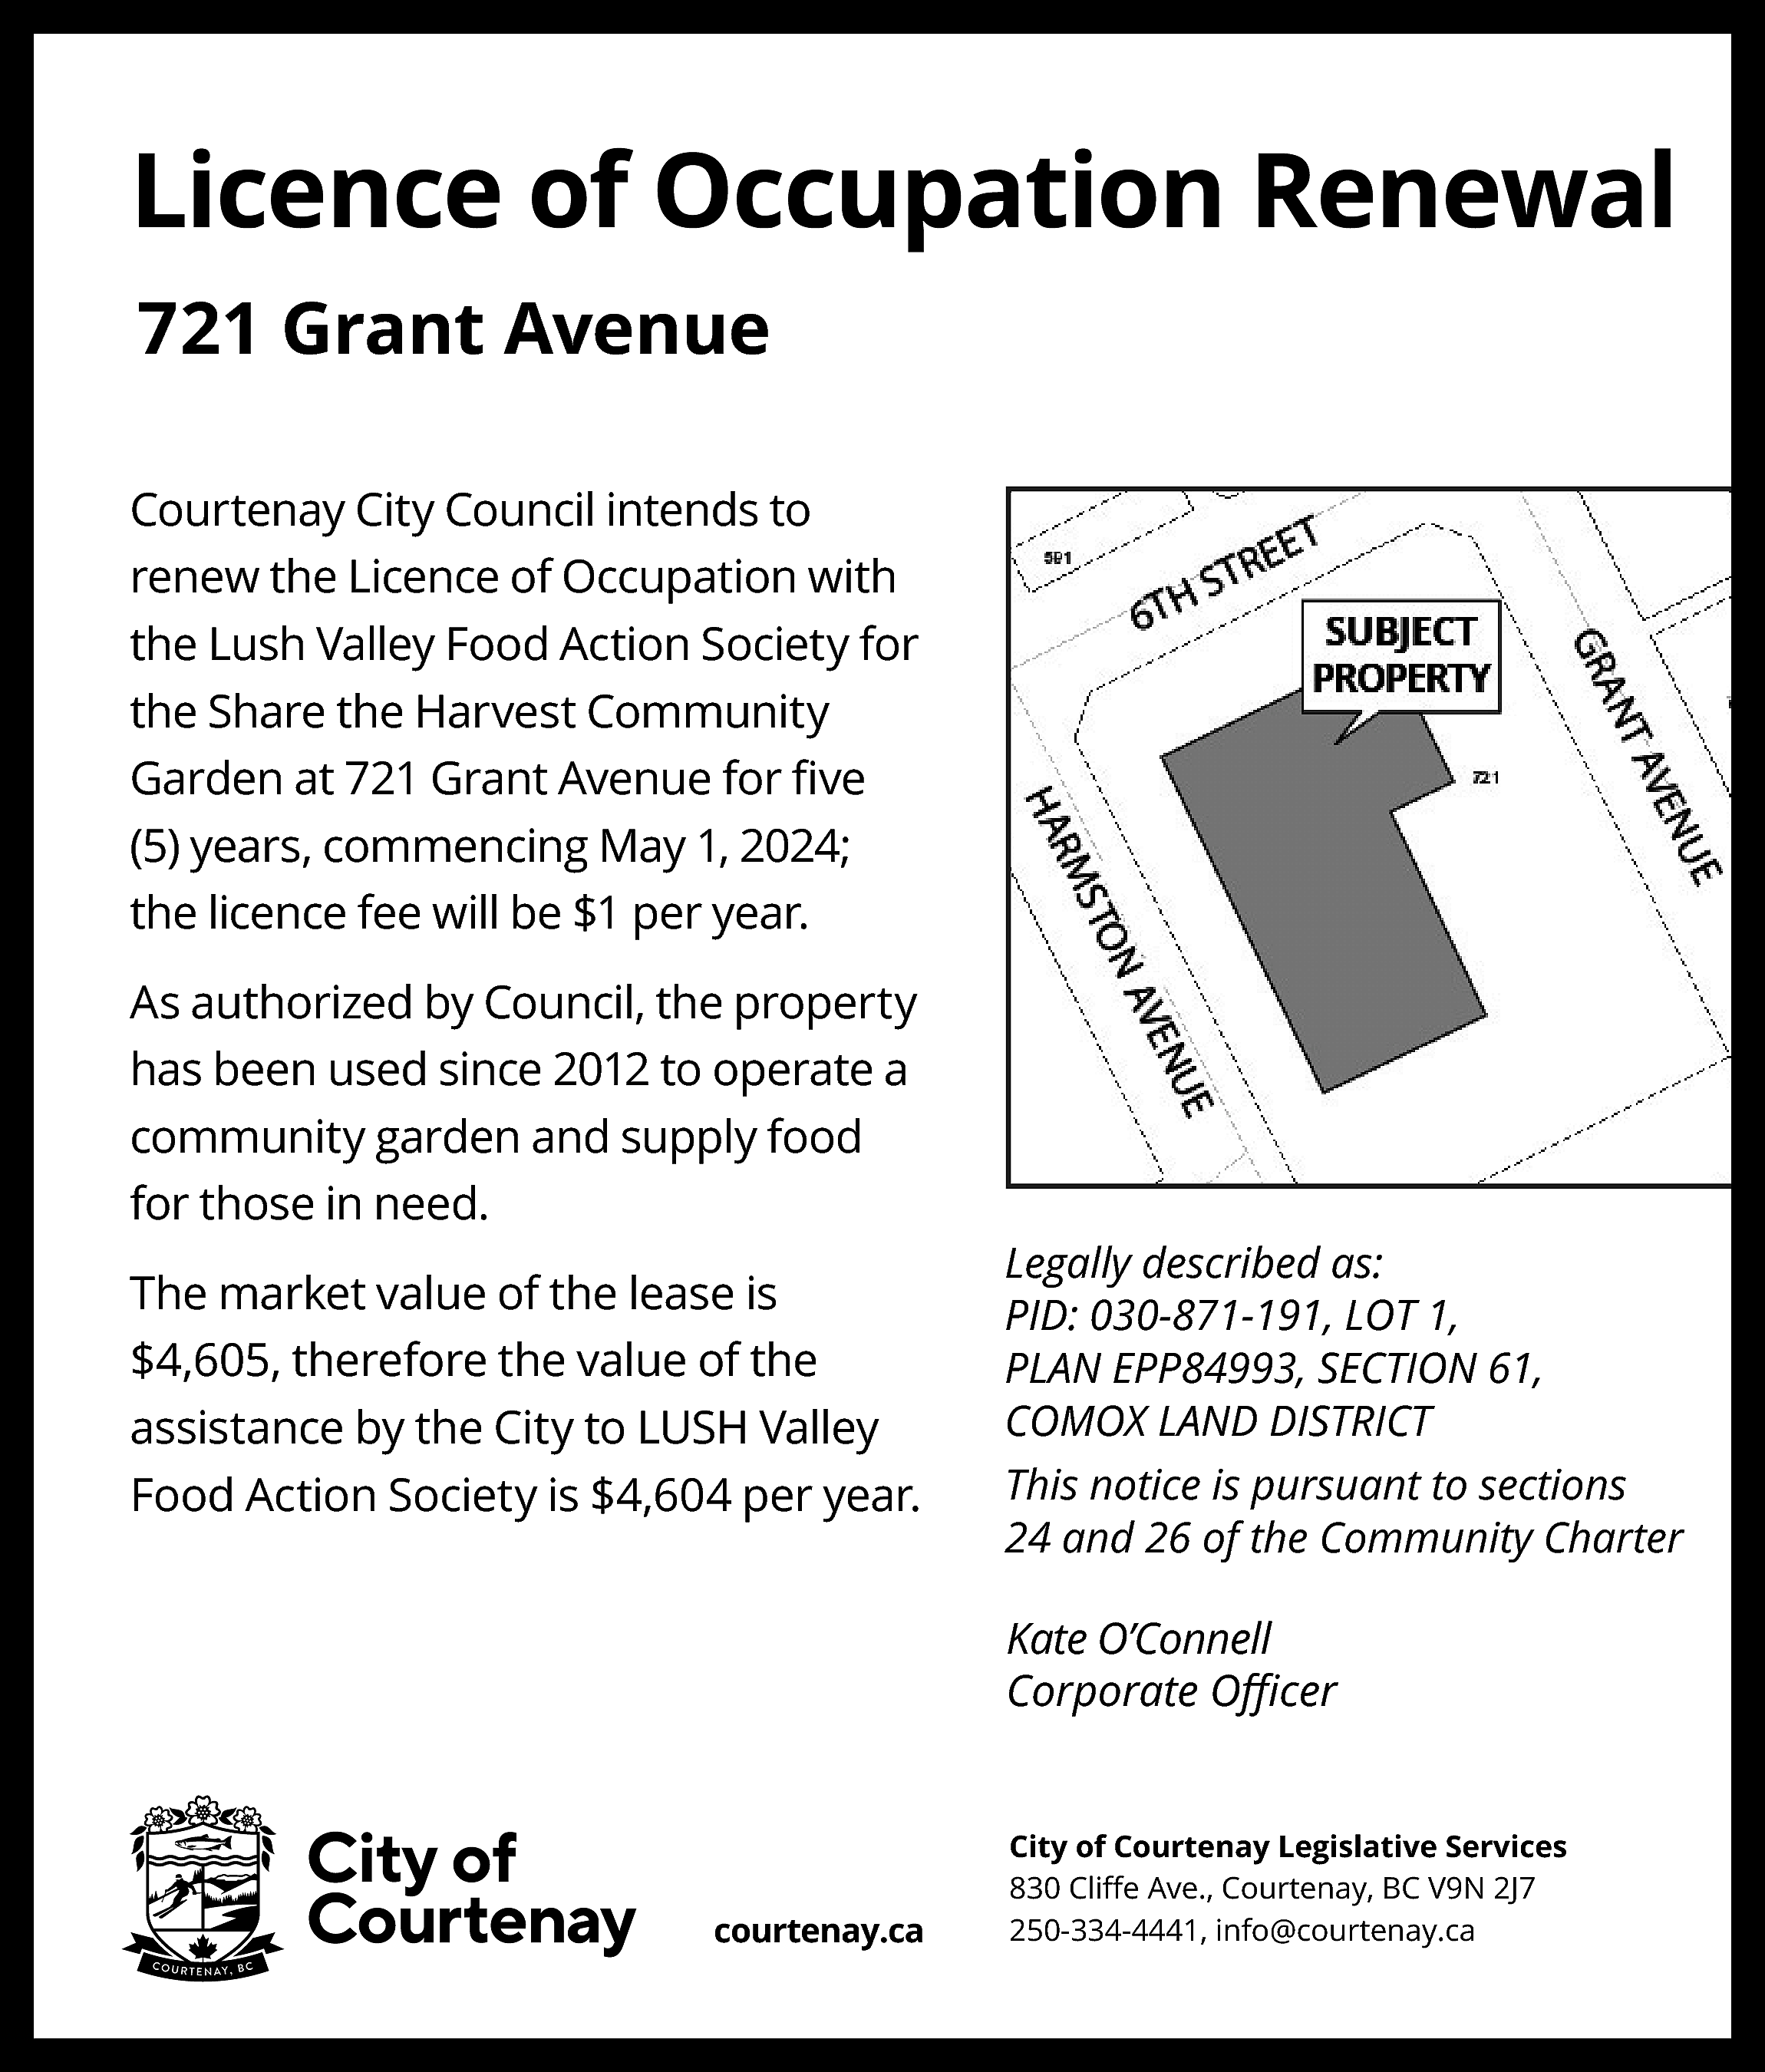 Licence of Occupation Renewal <br>721  Licence of Occupation Renewal  721 Grant Avenue  Courtenay City Council intends to  renew the Licence of Occupation with  the Lush Valley Food Action Society for  the Share the Harvest Community  Garden at 721 Grant Avenue for ﬁve  (5) years, commencing May 1, 2024;  the licence fee will be $1 per year.    Map coming    As authorized by Council, the property  has been used since 2012 to operate a  community garden and supply food  for those in need.  The market value of the lease is  $4,605, therefore the value of the  assistance by the City to LUSH Valley  Food Action Society is $4,604 per year.    Legally described as:  PID: 030-871-191, LOT 1,  PLAN EPP84993, SECTION 61,  COMOX LAND DISTRICT  This notice is pursuant to sections  24 and 26 of the Community Charter    Kate O’Connell  Corporate Oﬃcer    courtenay.ca    City of Courtenay Legislative Services  830 Cliﬀe Ave., Courtenay, BC V9N 2J7  250-334-4441, info@courtenay.ca    